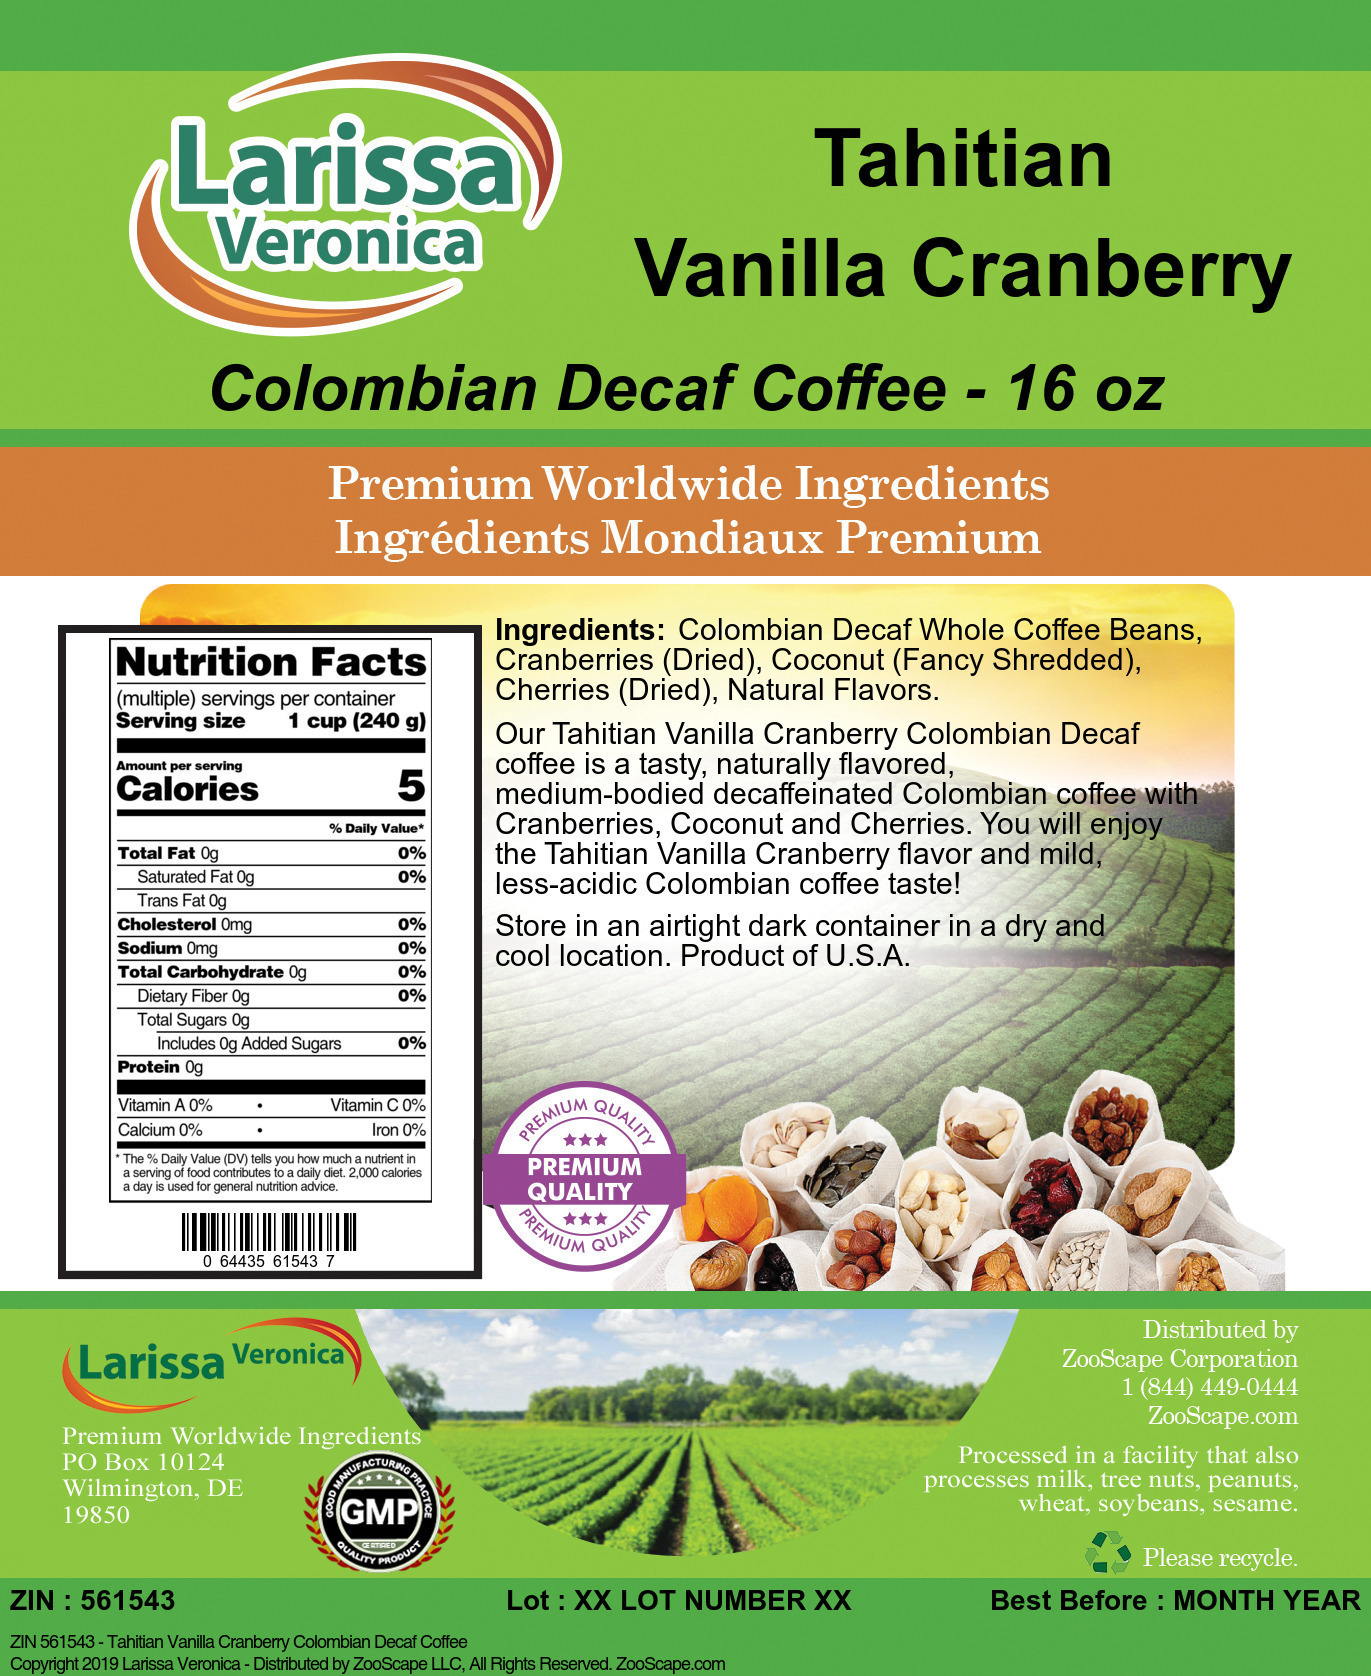 Tahitian Vanilla Cranberry Colombian Decaf Coffee - Label